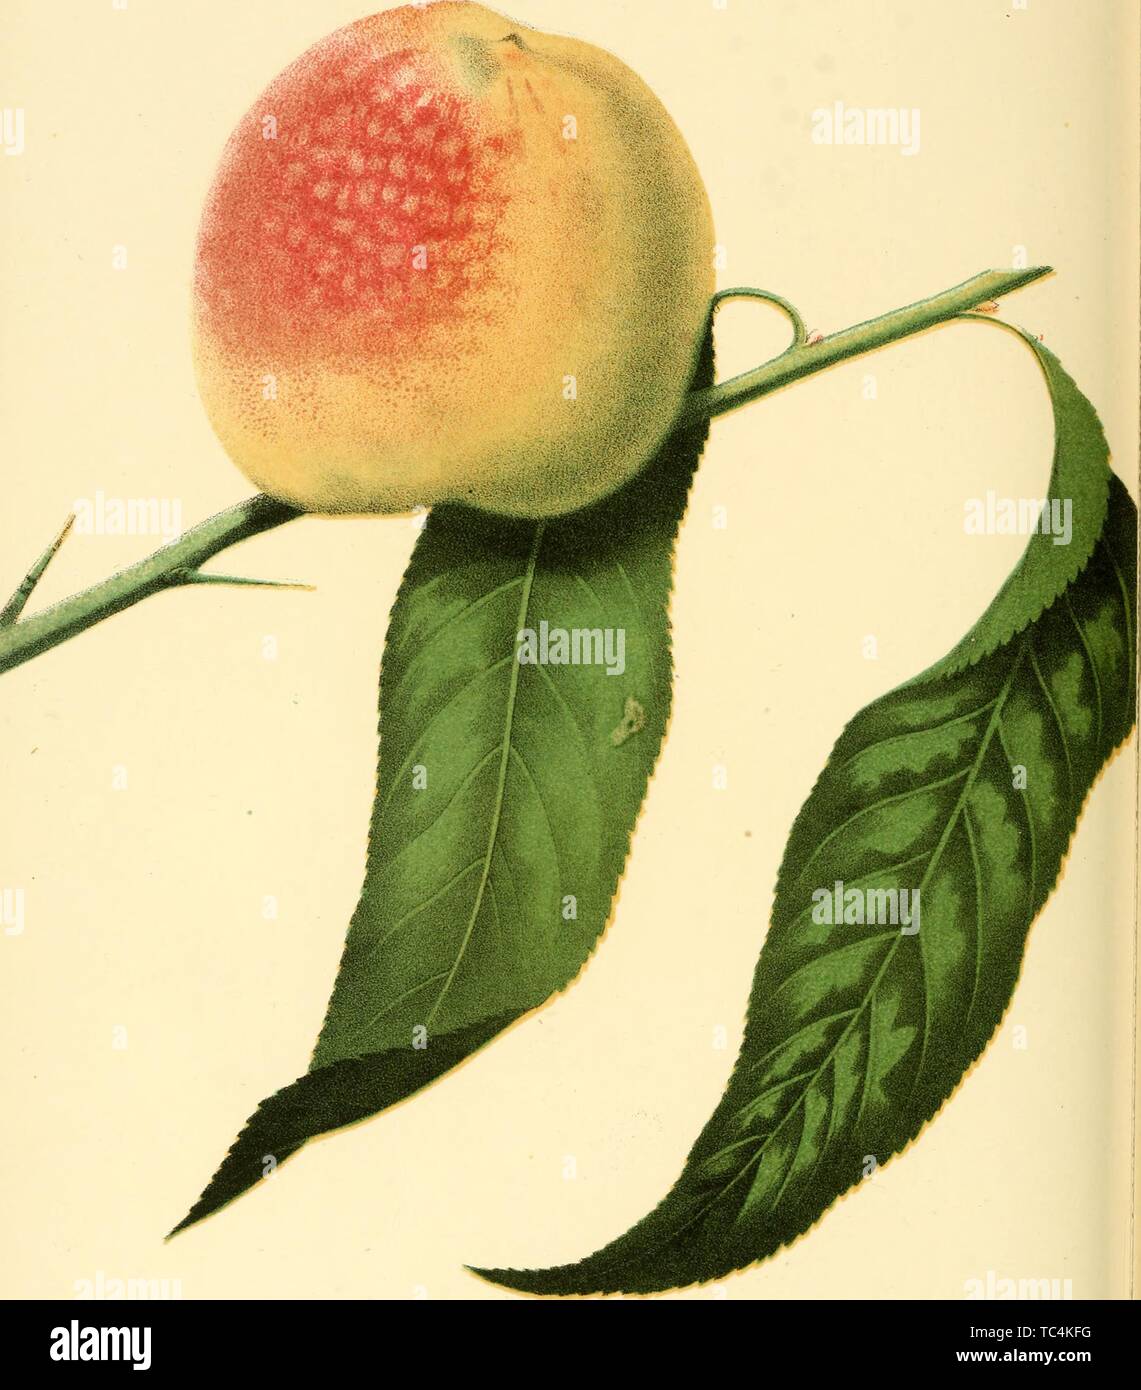 Engraving of the Stetson's Seedling Peach, from the book 'The fruits of America' by Charles Mason Hovey, 1848. Courtesy Internet Archive. () Stock Photo